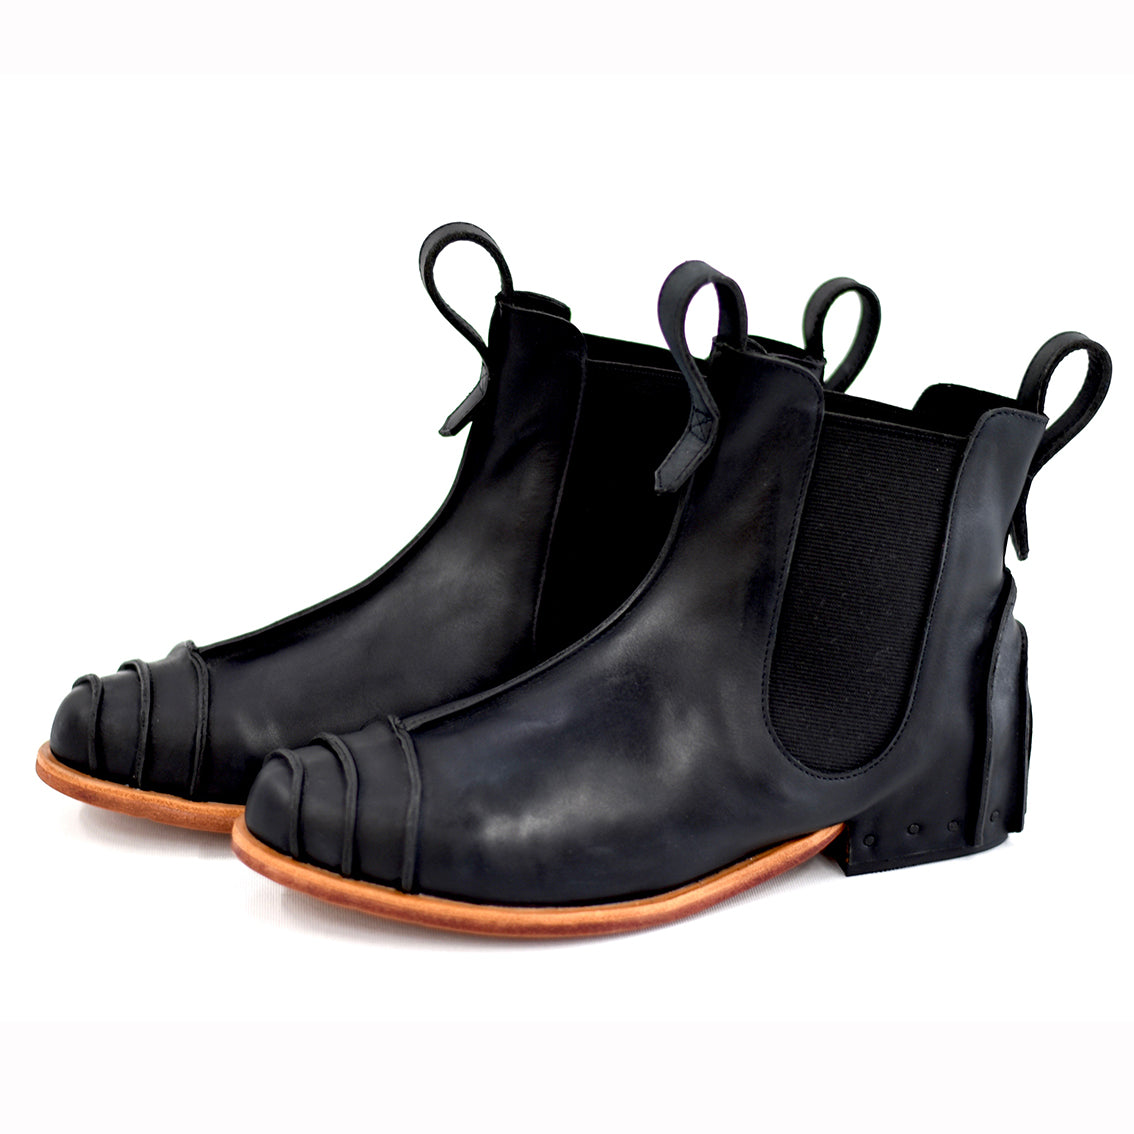 Elastic sided Rathdowne Ankle Boot with leather pulls